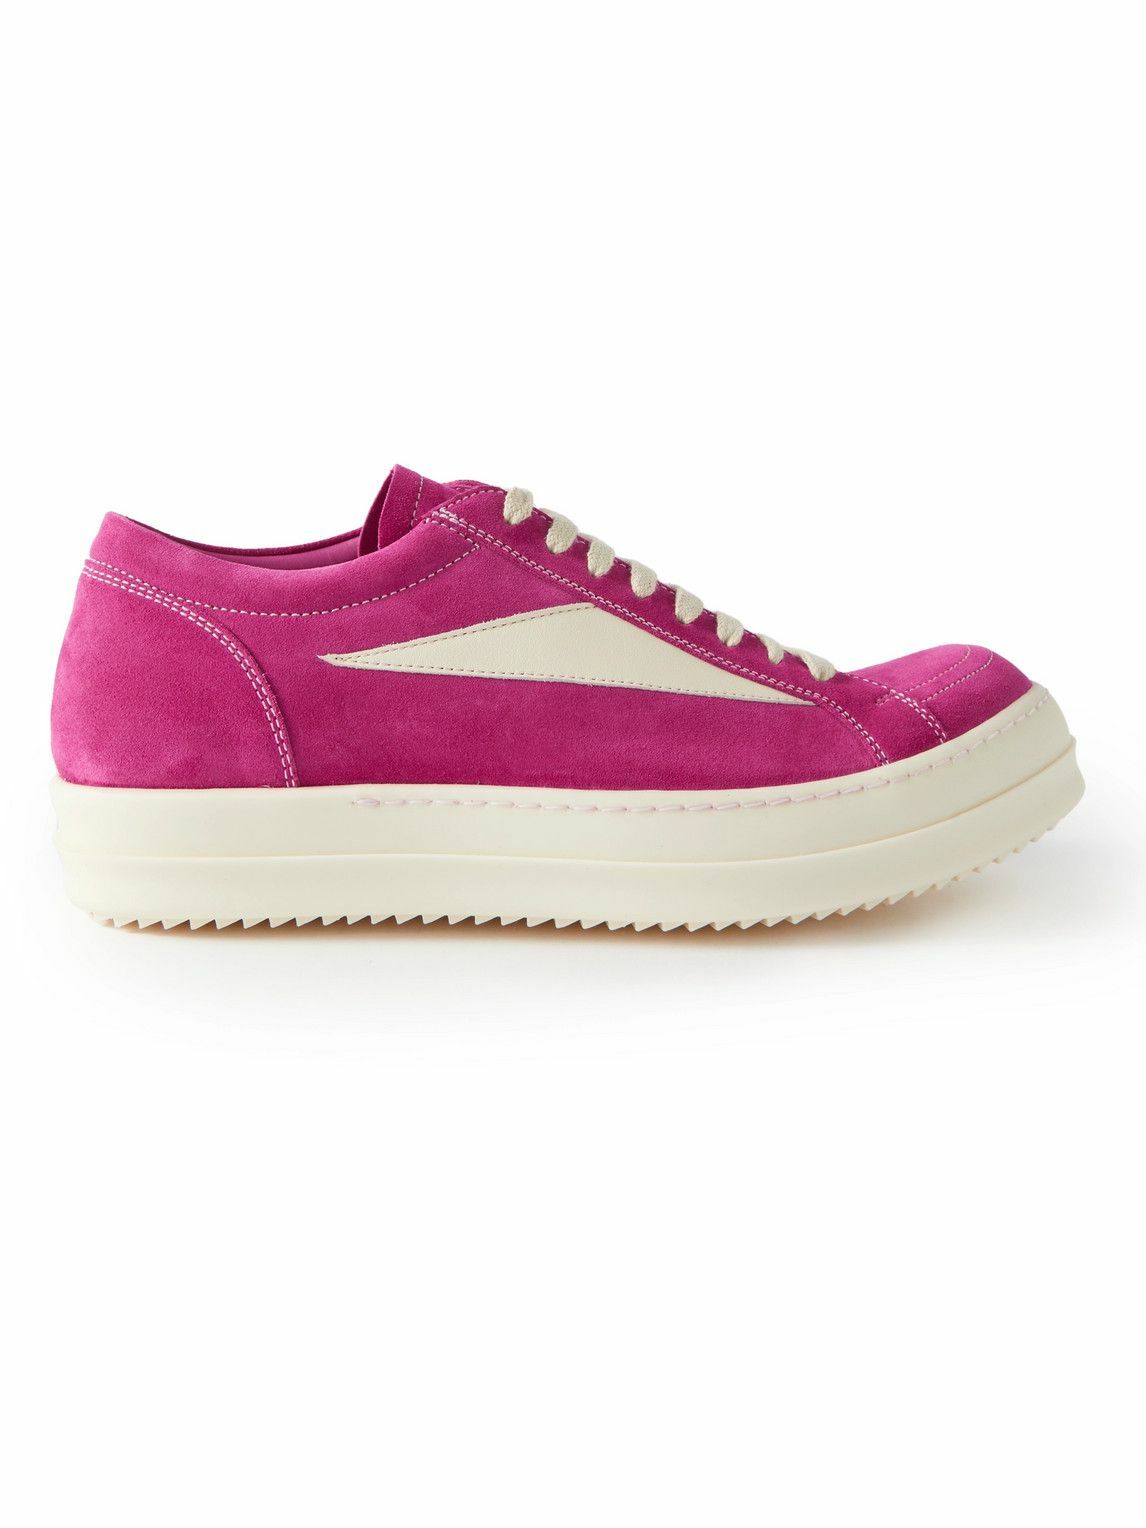 Rick Owens - Leather-Trimmed Suede Sneakers - Pink Rick Owens